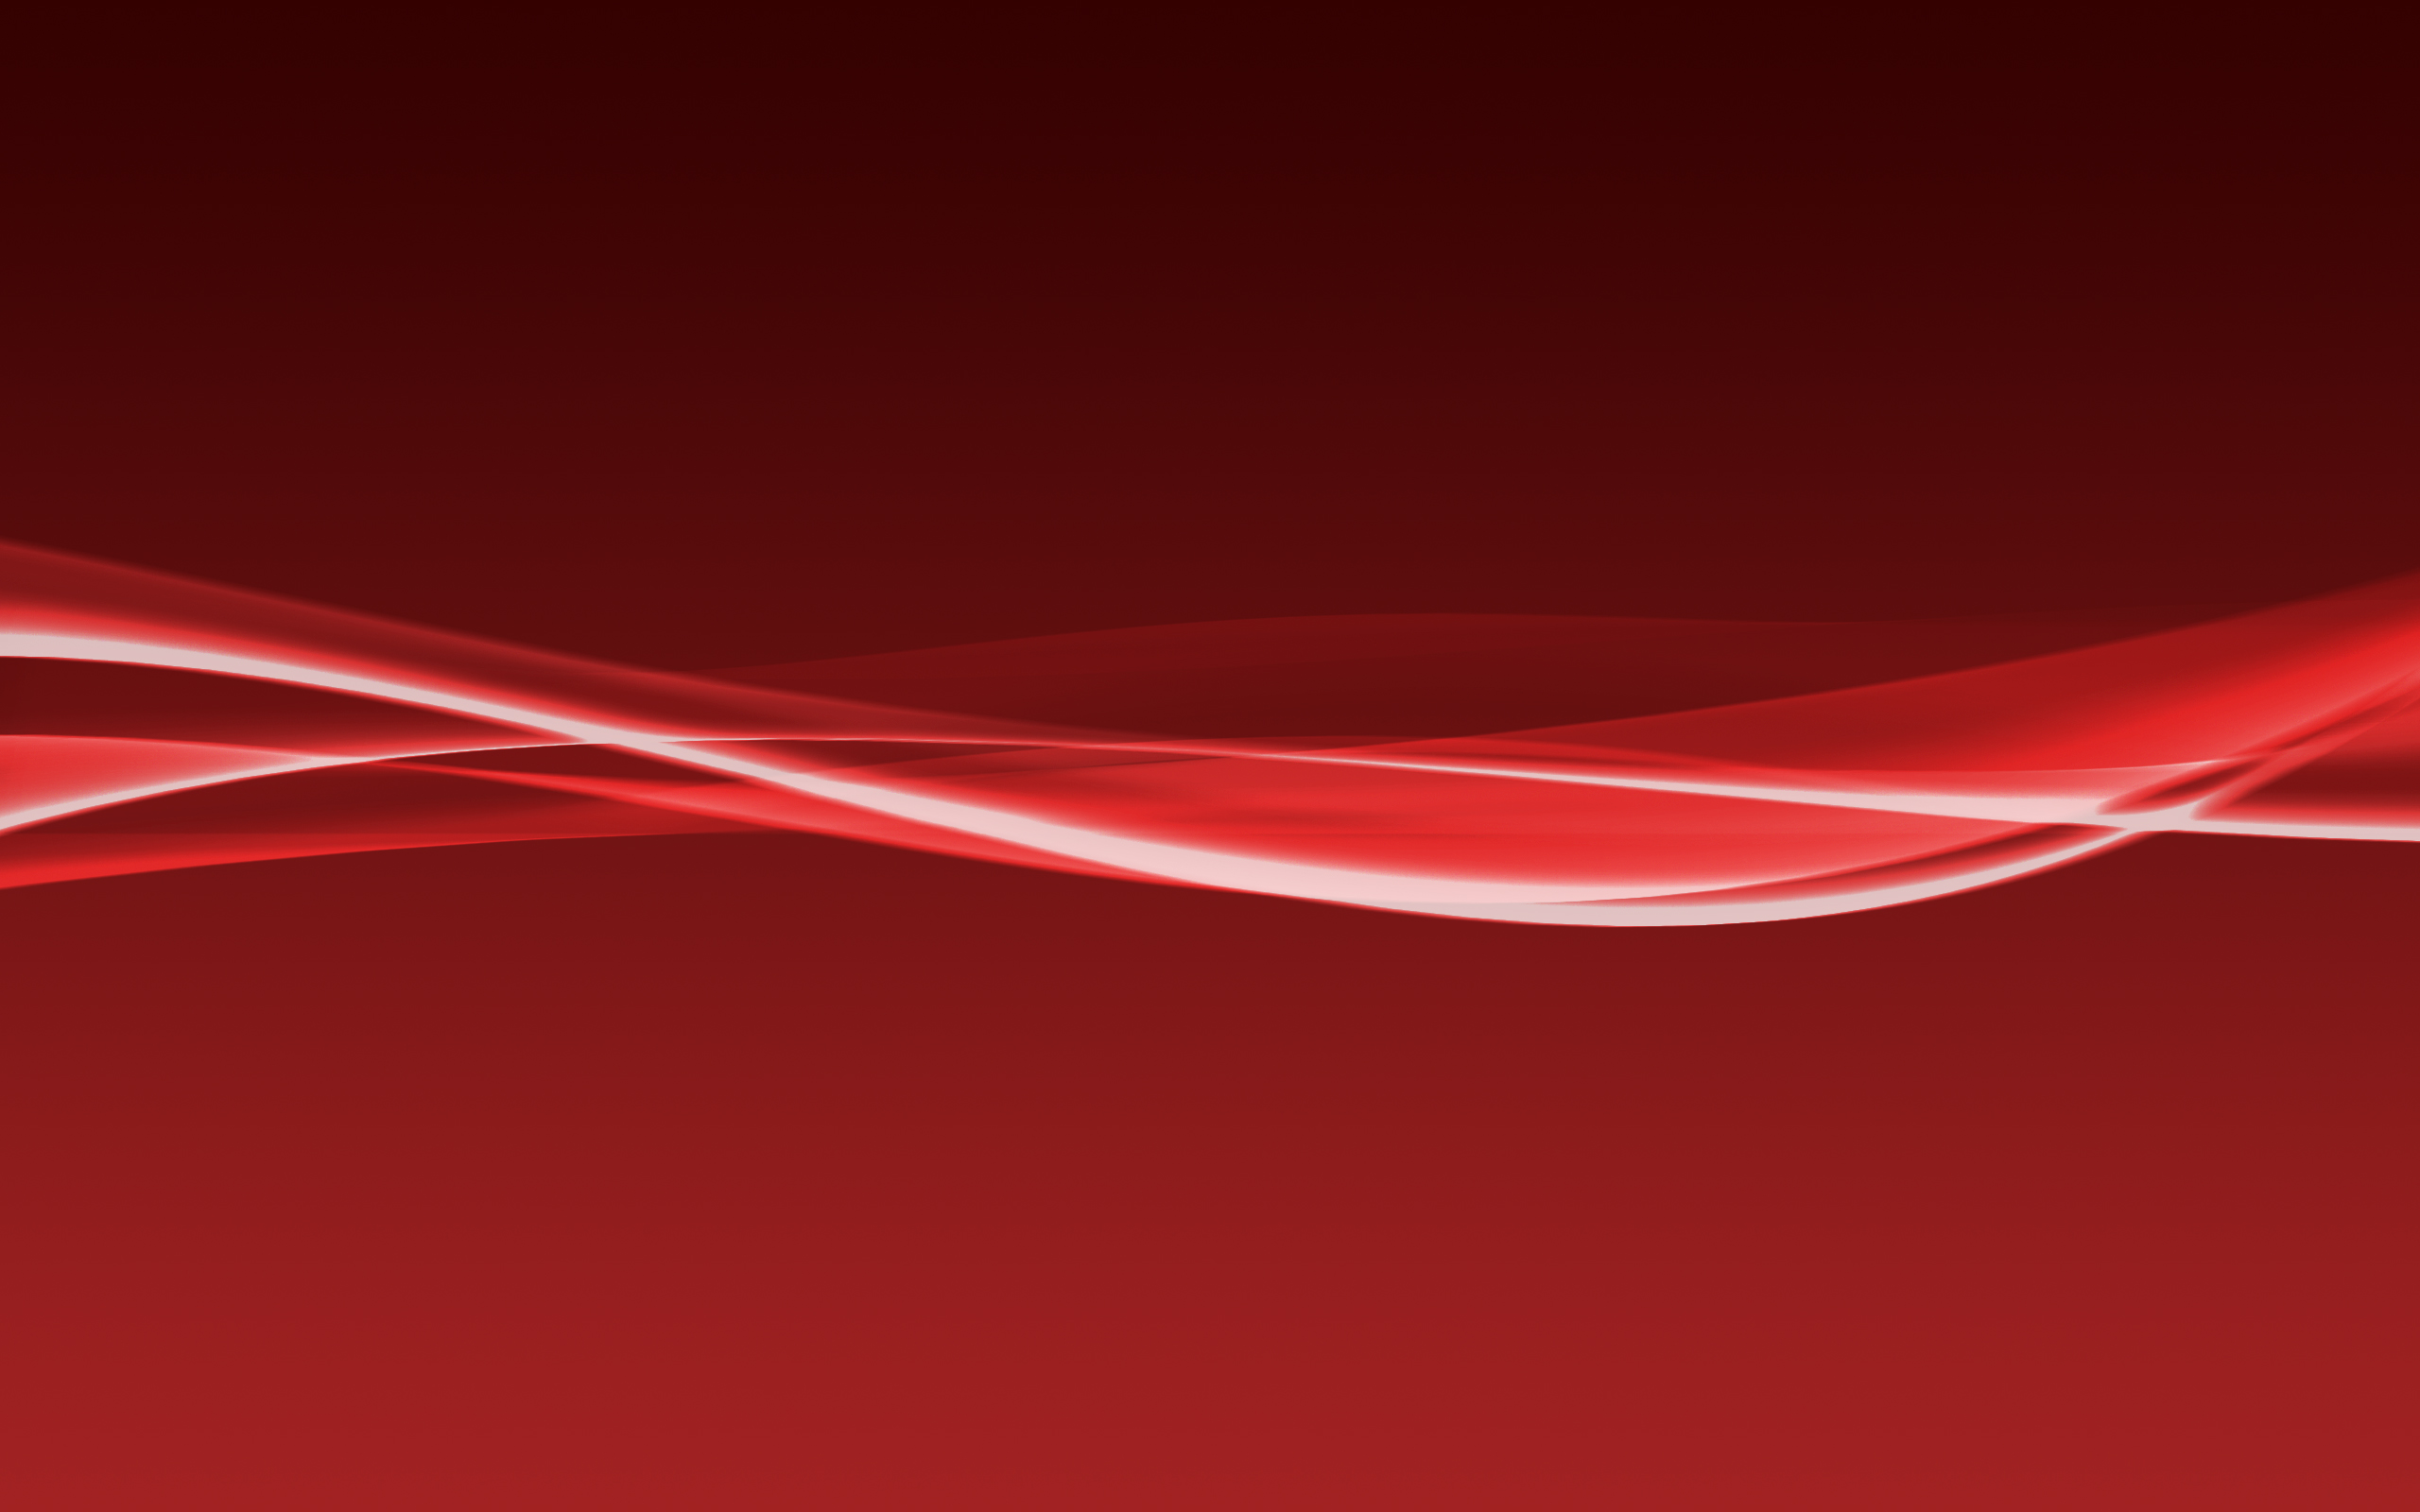 Gallery For Gt Ps3 Wallpaper HD Red